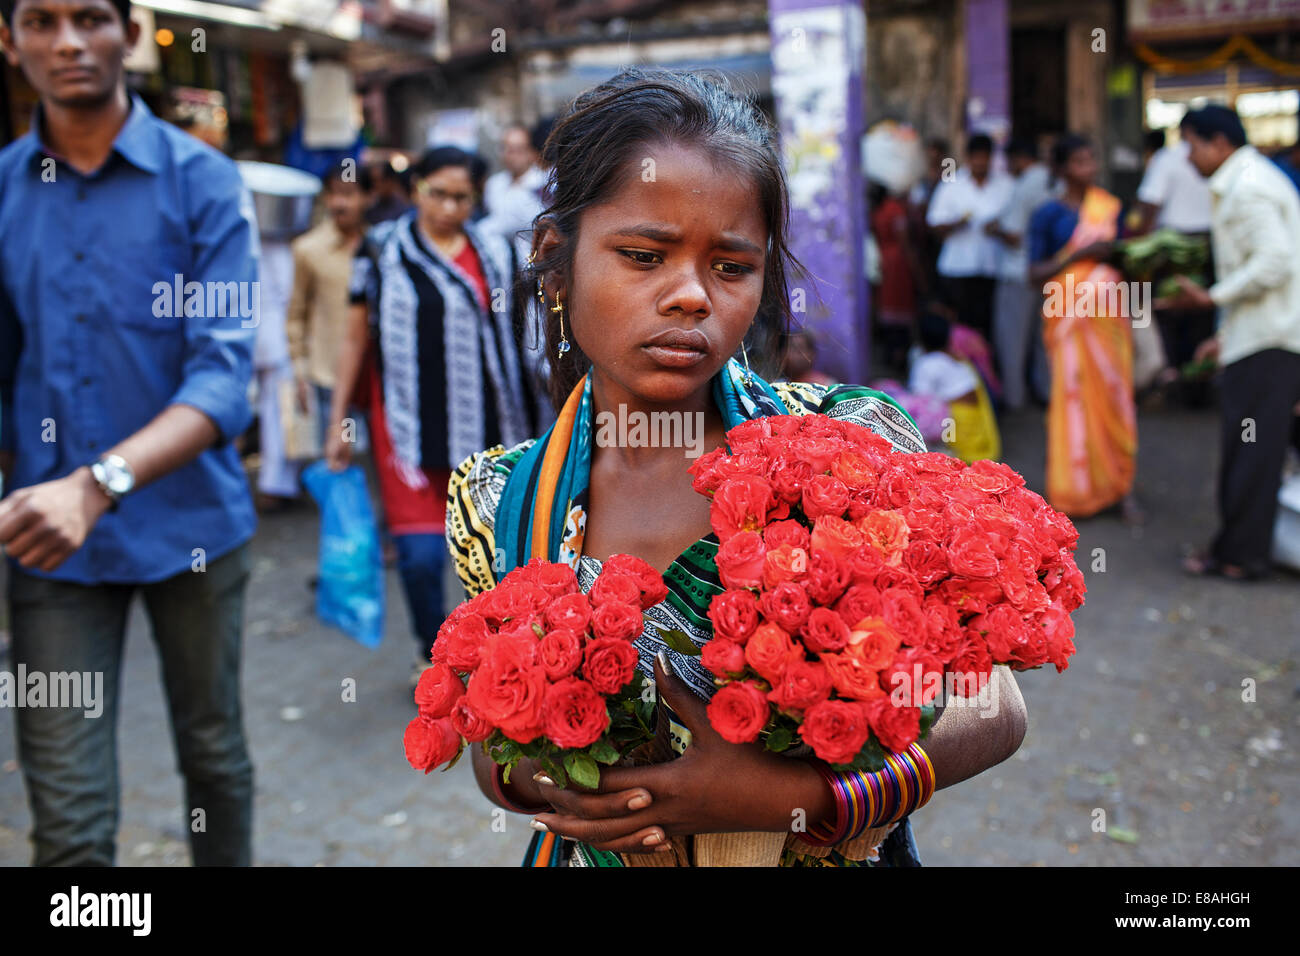 A young girl selling flowers outside Dadar Railway Station in Mumbai, India. Stock Photo